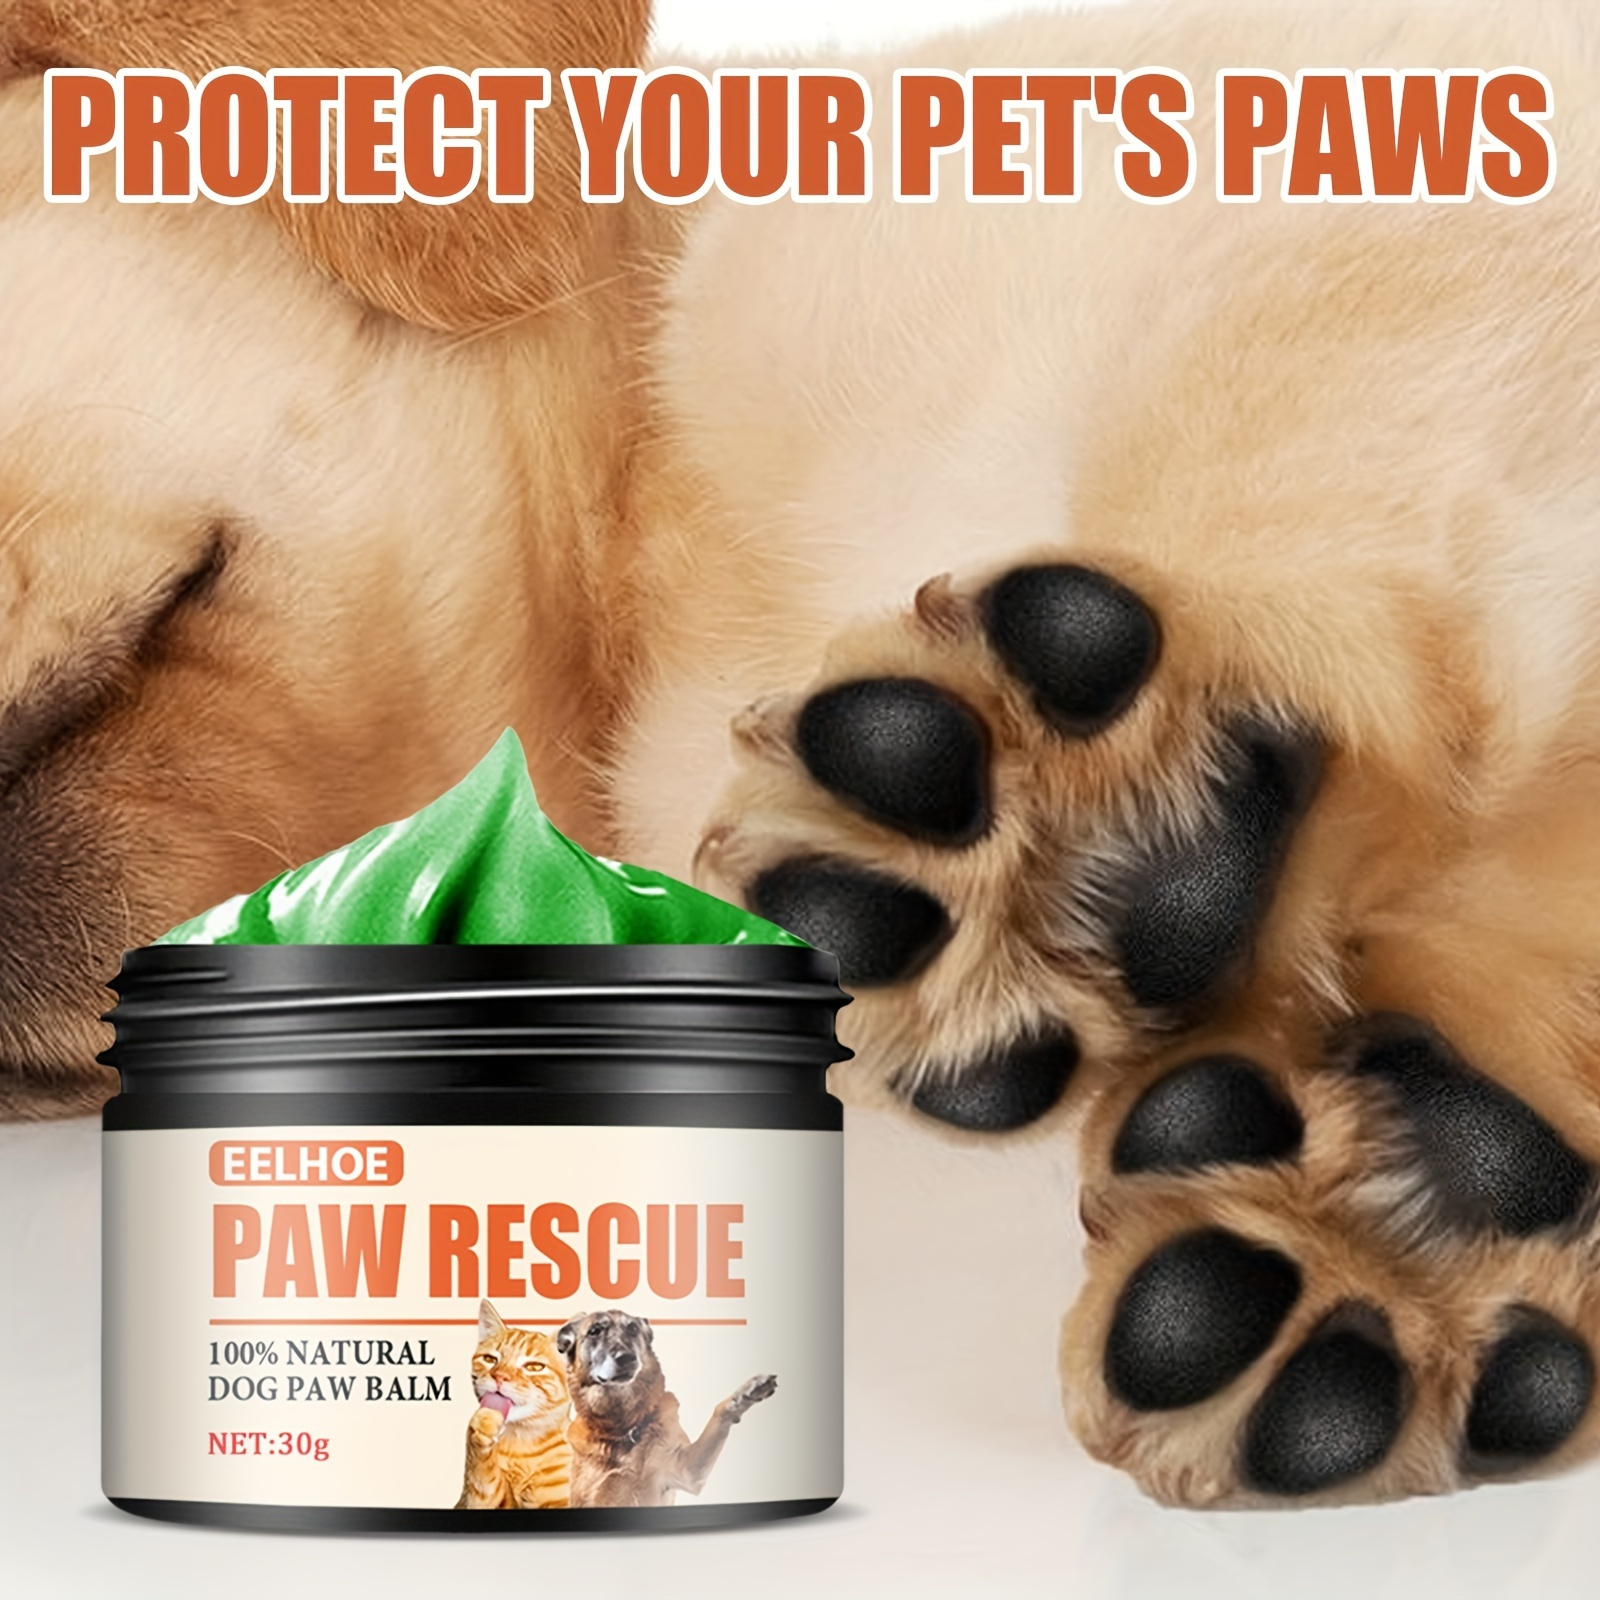 

Paw Rescue, Moisturizing Pet Paw Care Cream For Cats And Dogs - Soothes And Repairs Cracked Paws - 30g